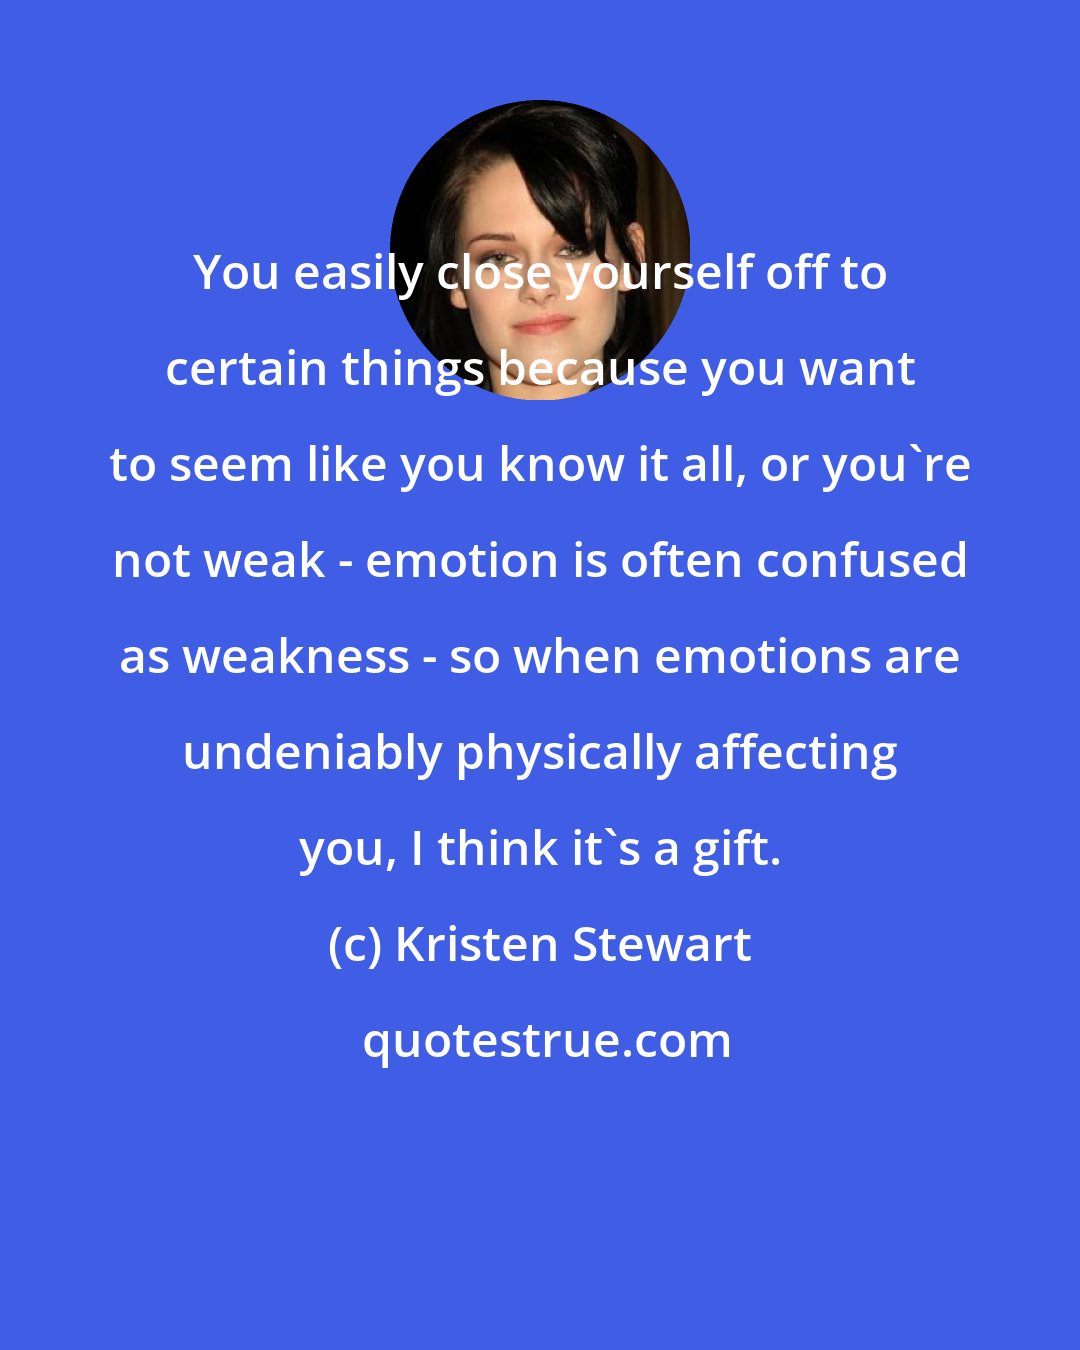 Kristen Stewart: You easily close yourself off to certain things because you want to seem like you know it all, or you're not weak - emotion is often confused as weakness - so when emotions are undeniably physically affecting you, I think it's a gift.